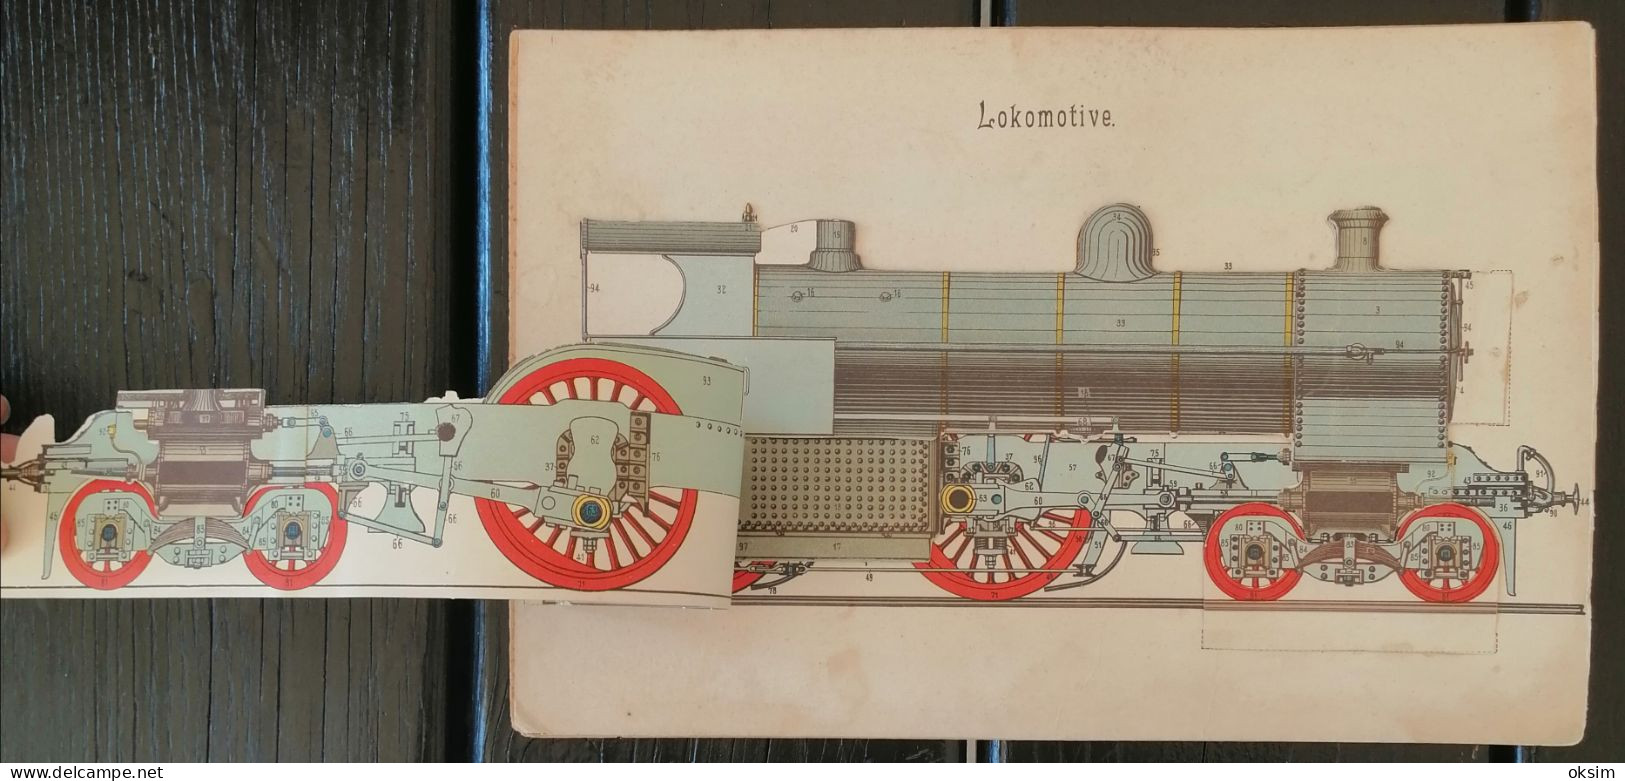 Drawings Of Machinery In Colour, Consisting Of Several Layers That Can Be Unfolded To Show The Interior Of The Machines - Machines